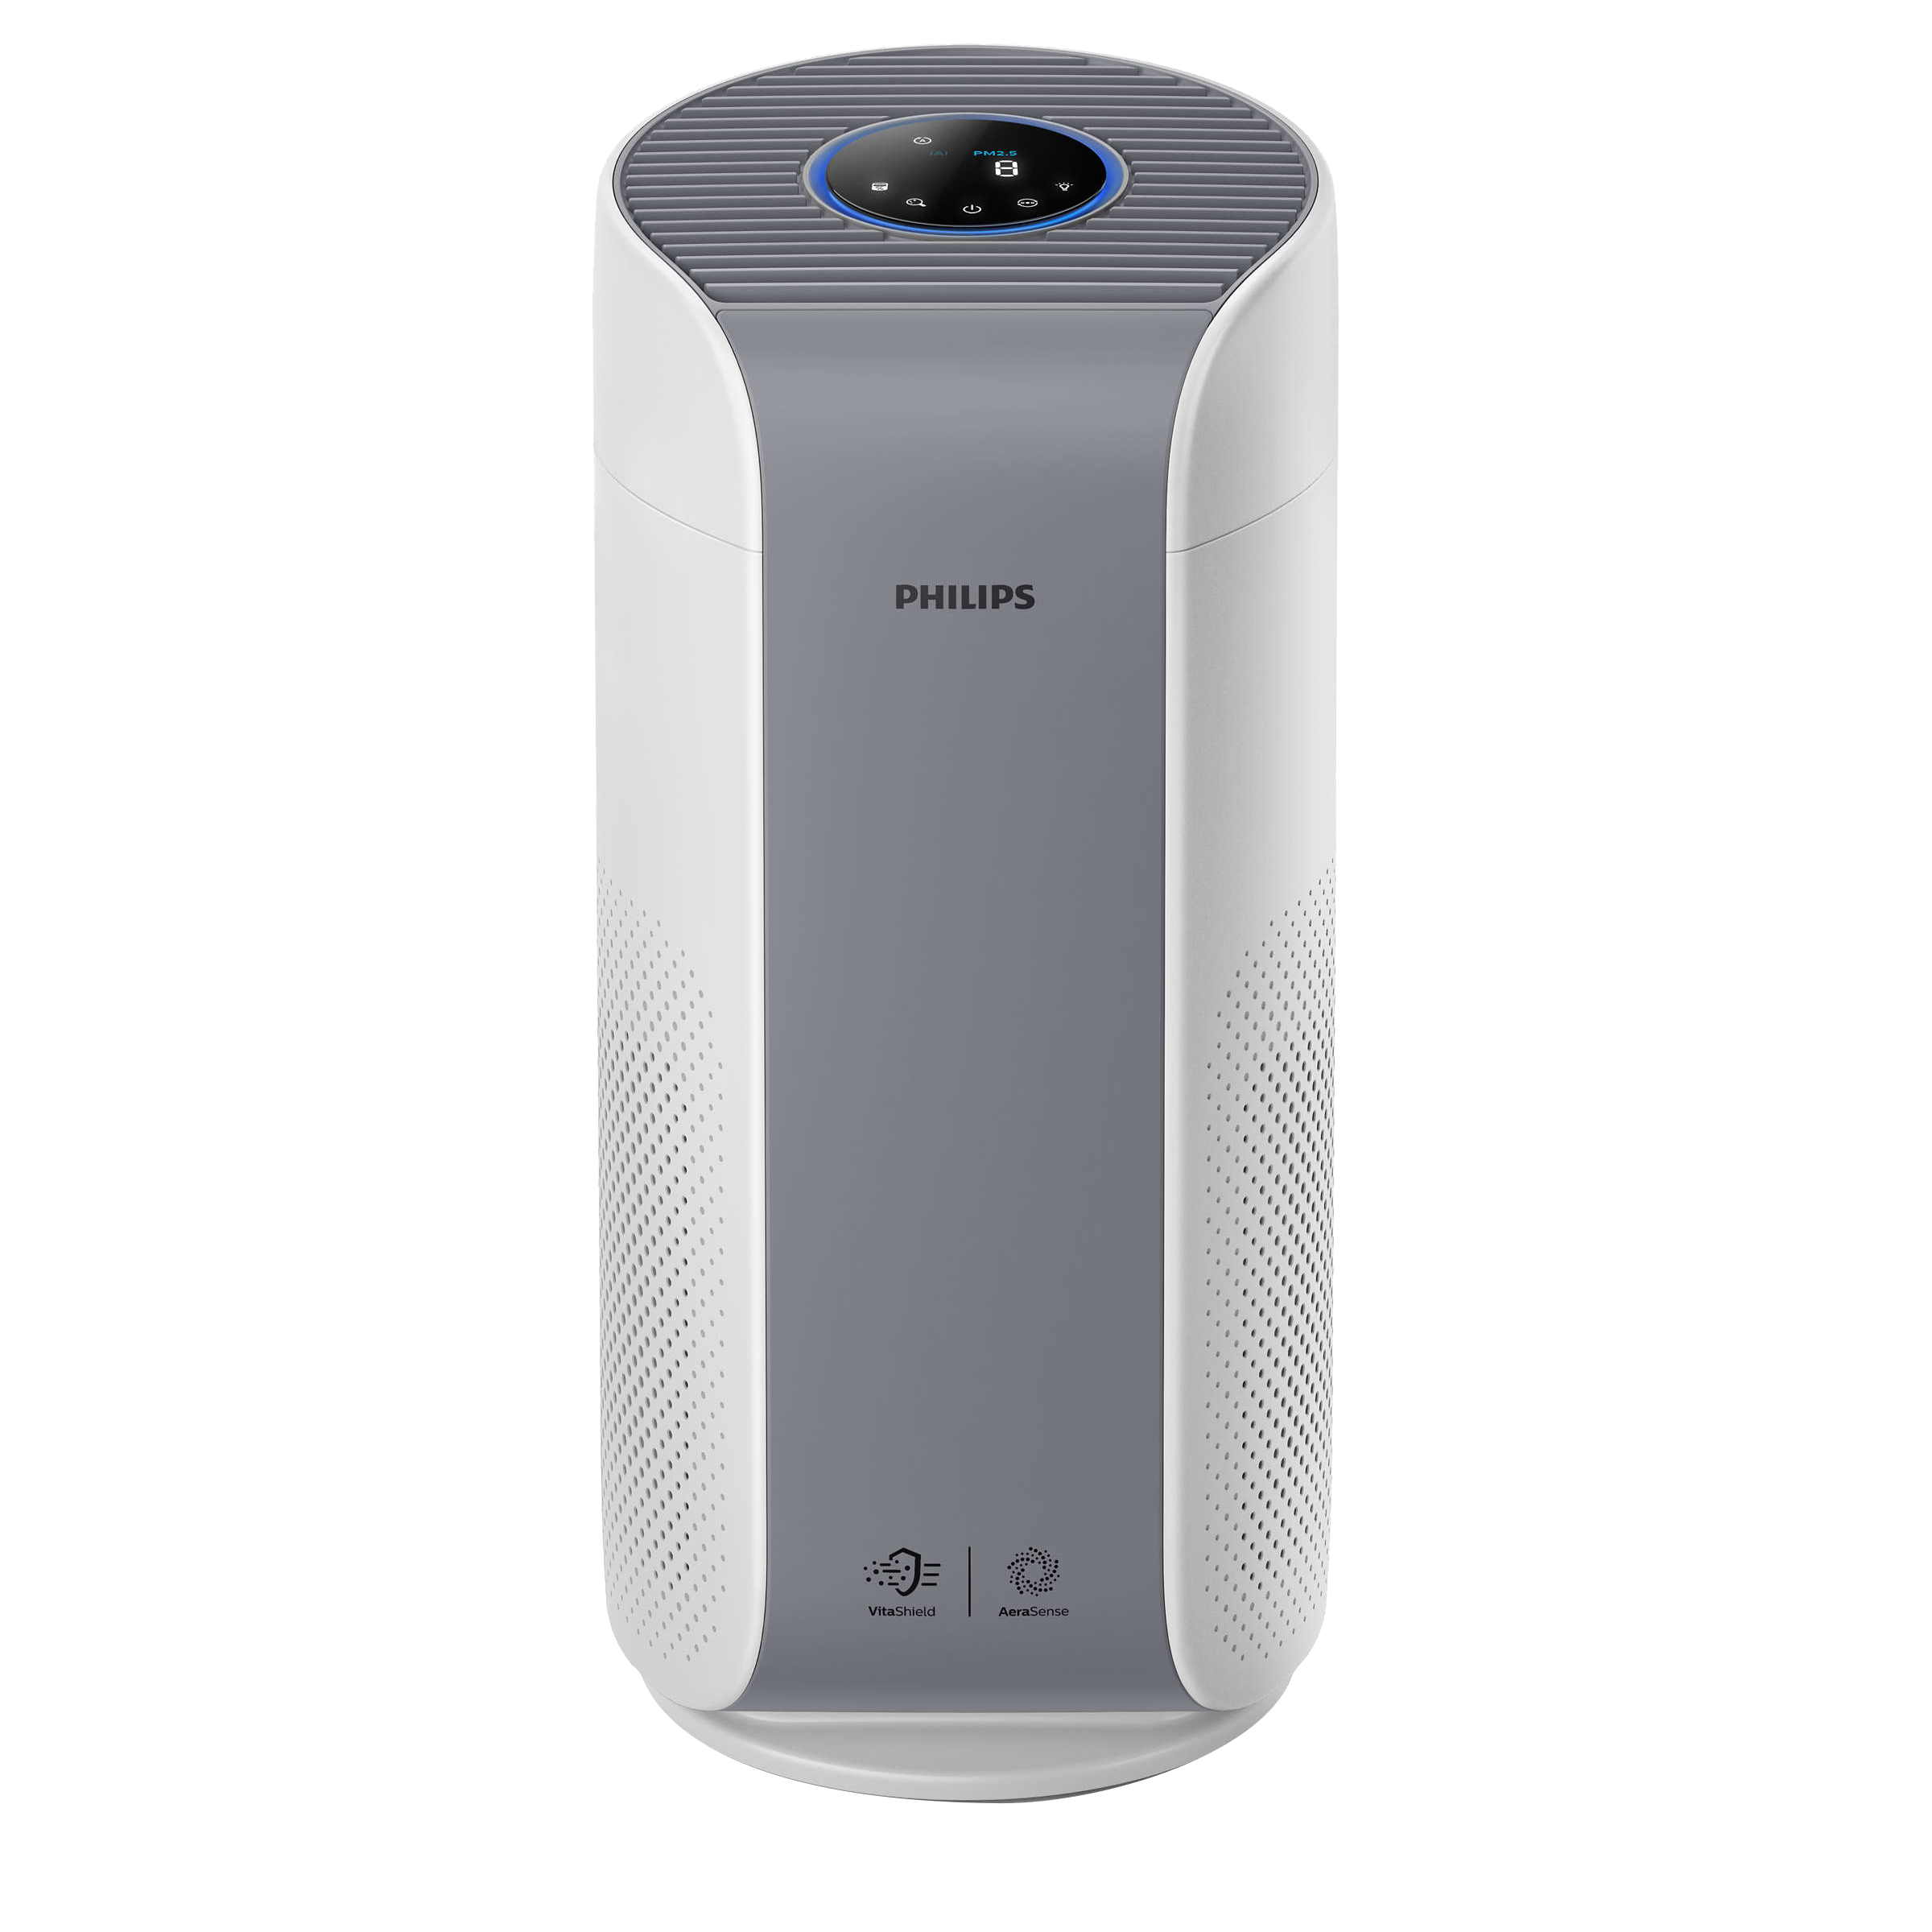 philips - philips Vitashield IPS and AeraSense Technology Air Purifier (Multi Touch, AC1758/63, Mid Grey and White)